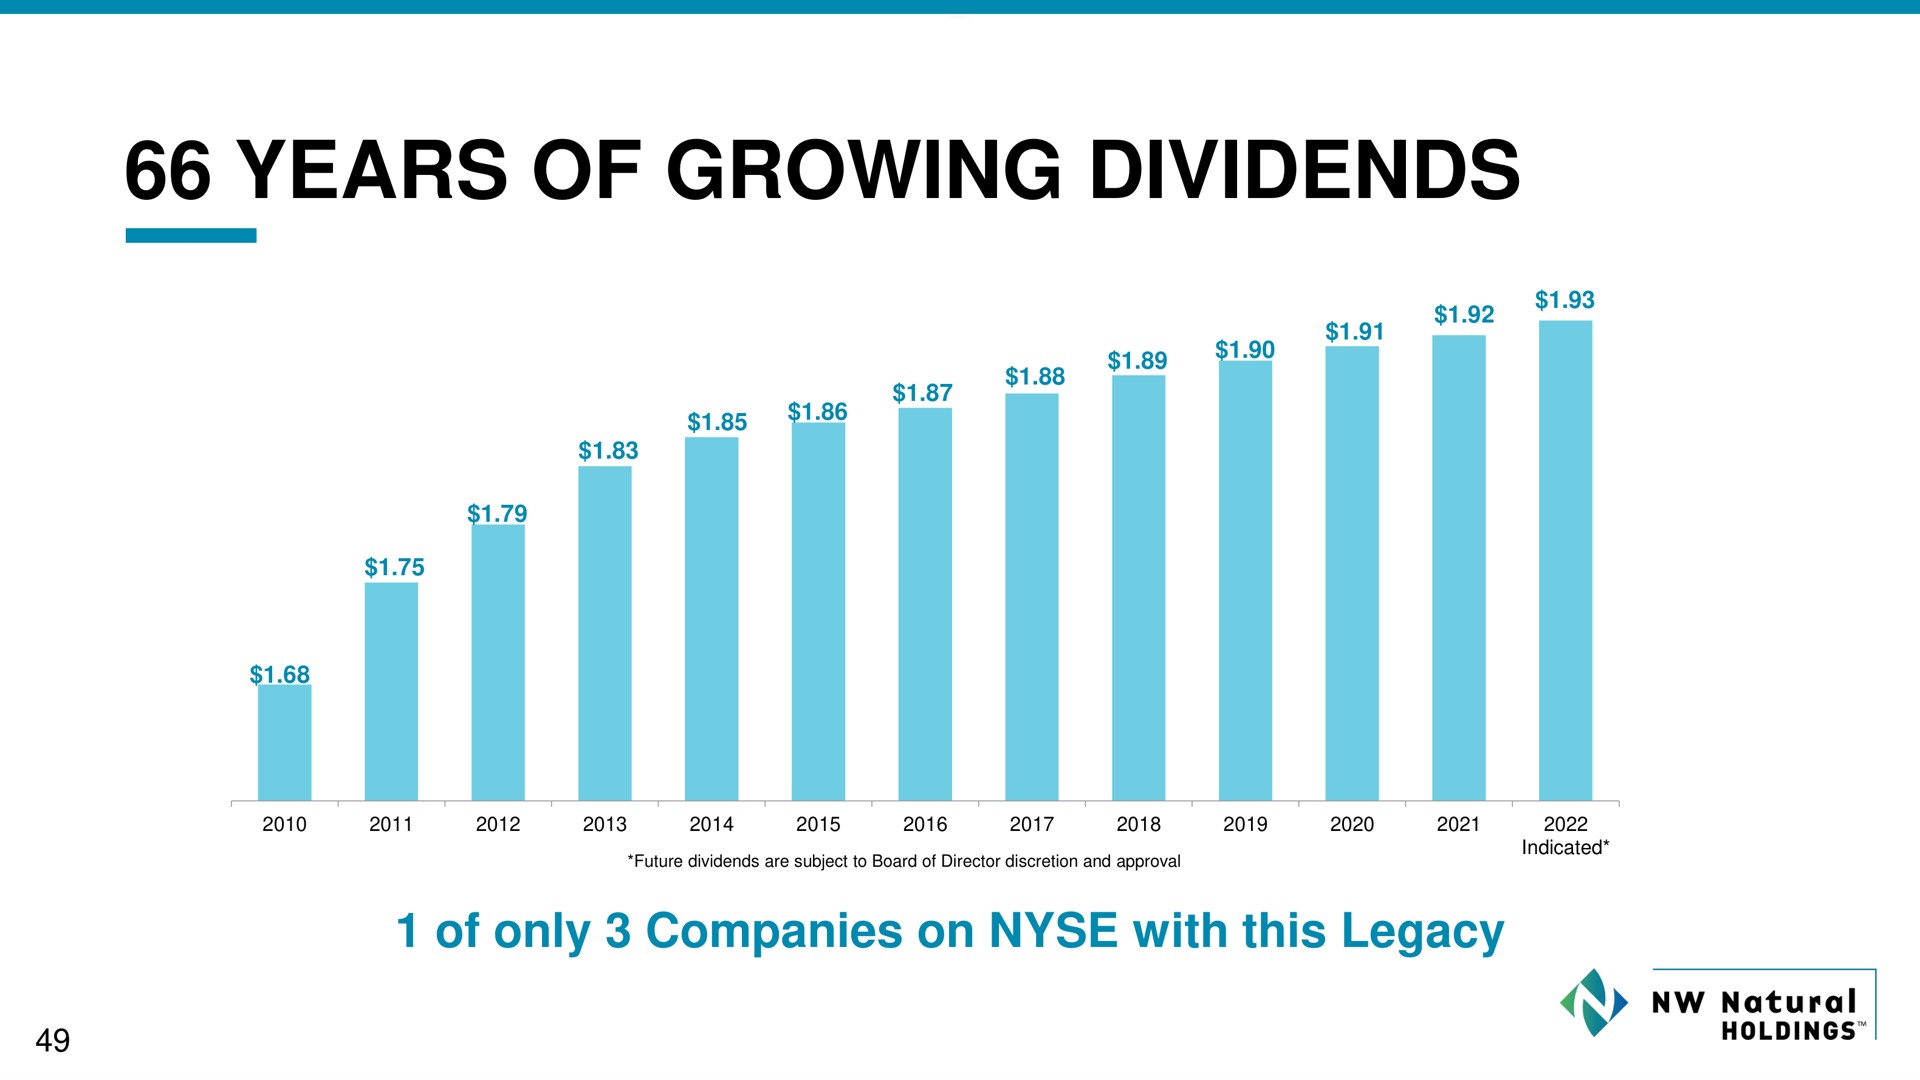 years of growing dividends to | NW Natural Holdings